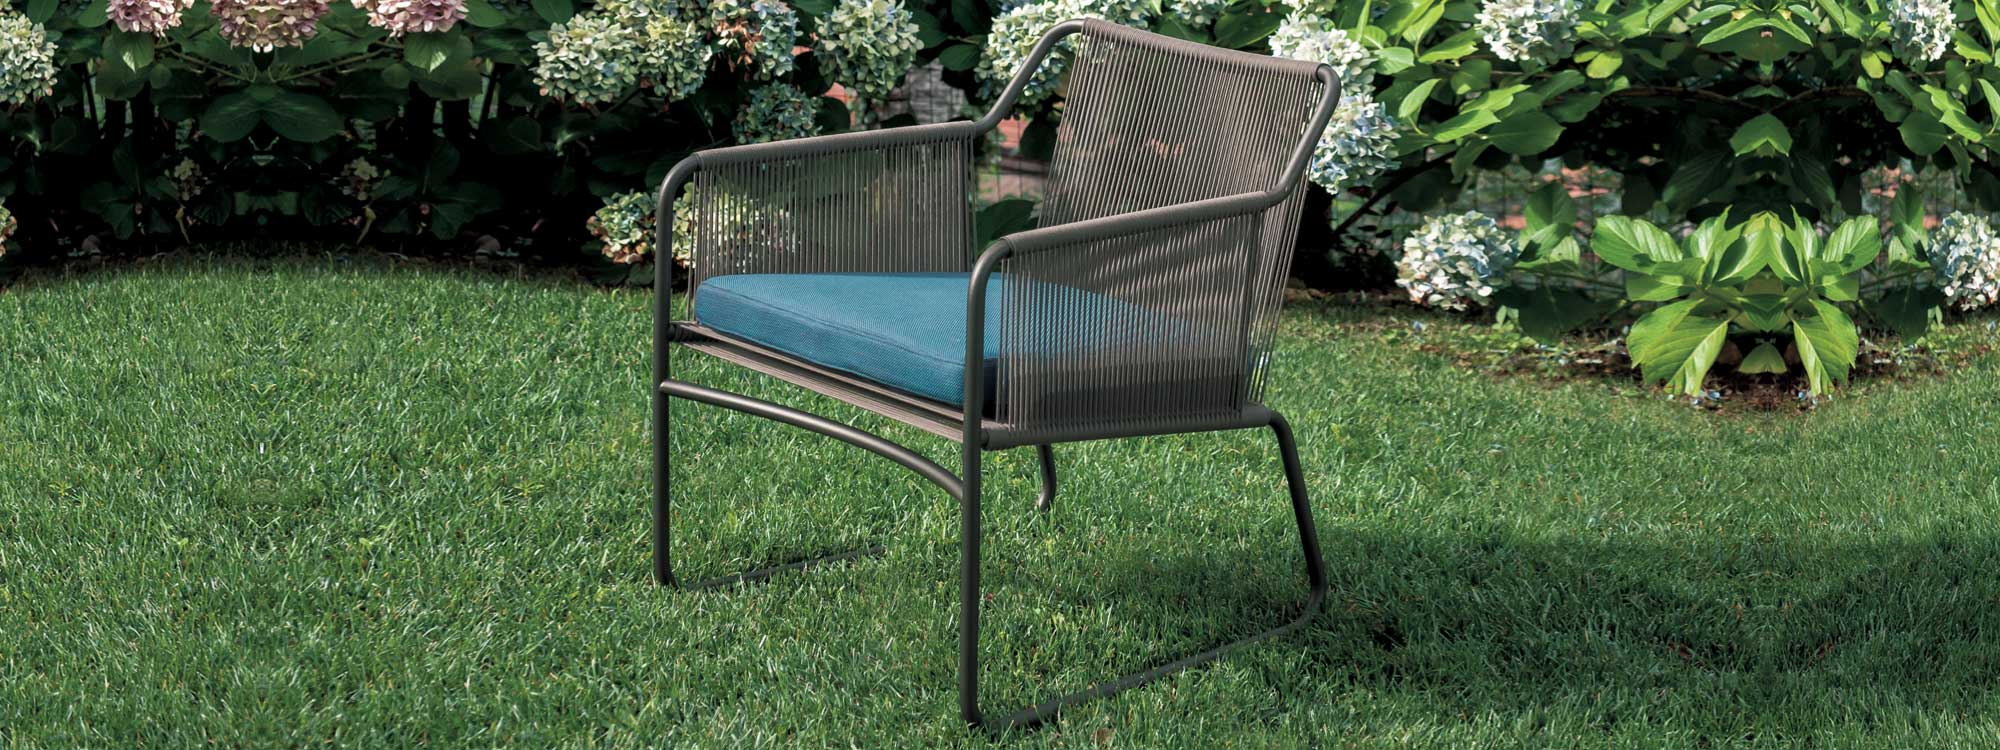 Image of RODA Harp black minimalist garden lounge chair with teal-color cushion, shown on lawn with Hydrangeas in background